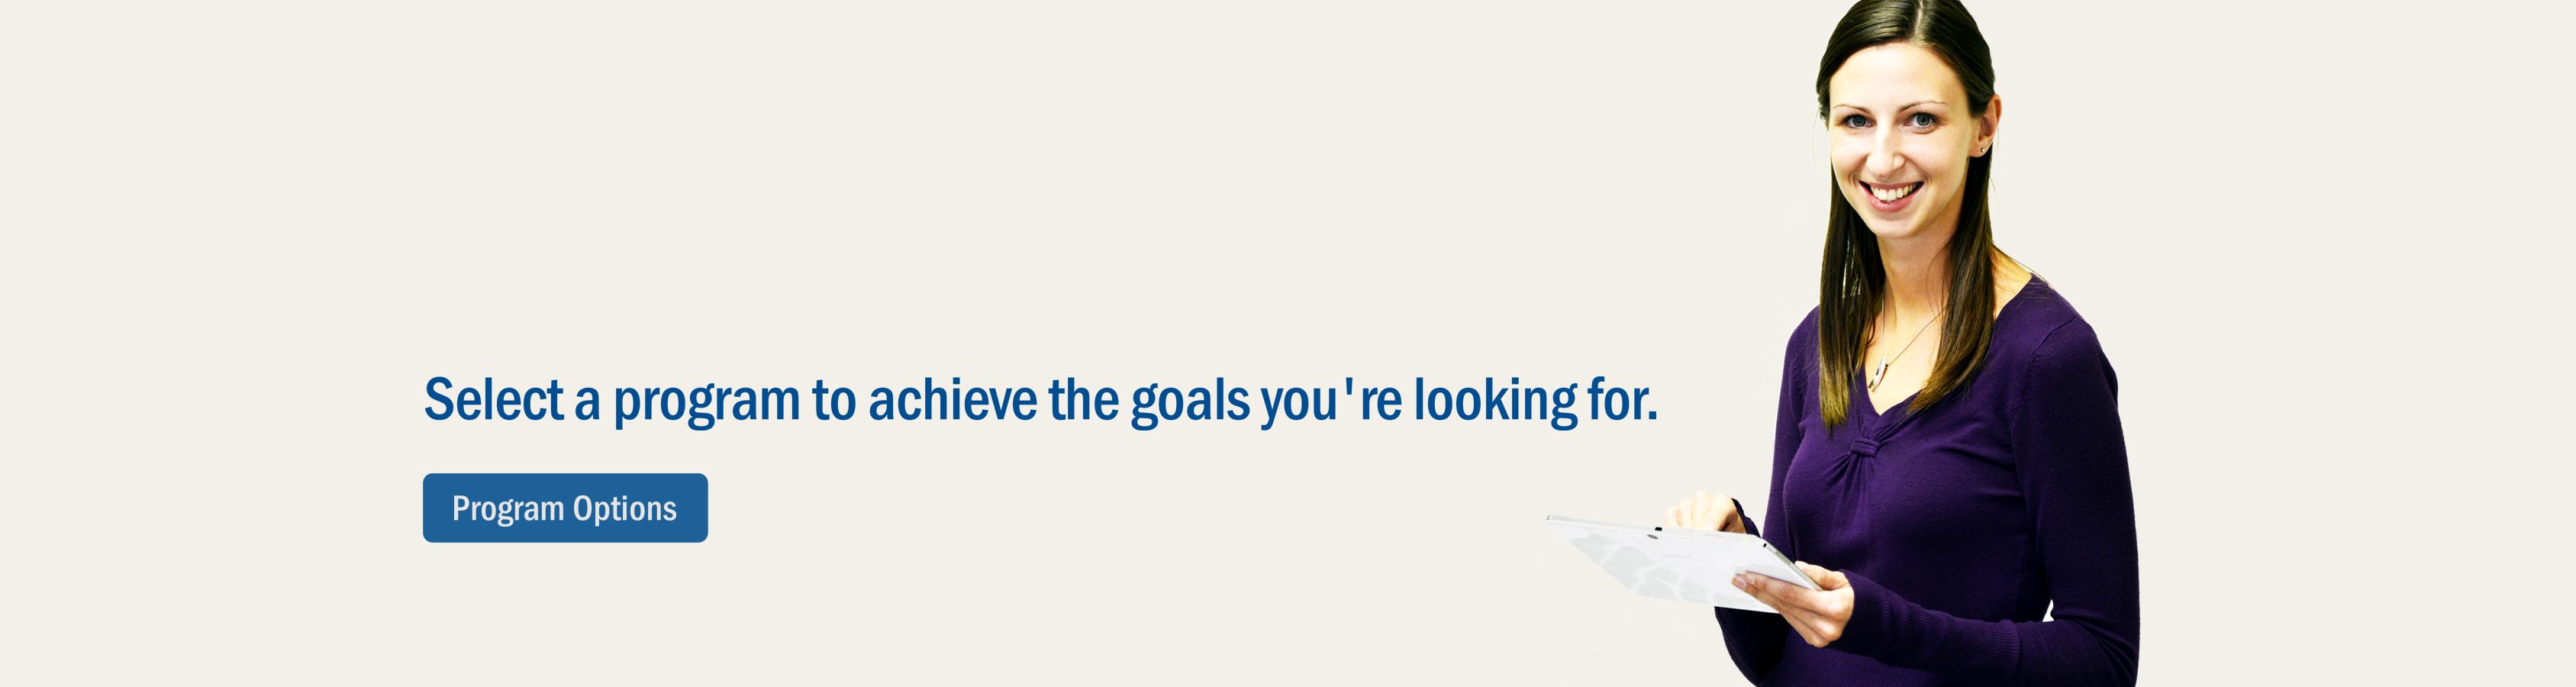 Select a program to achieve the goals you're looking for.